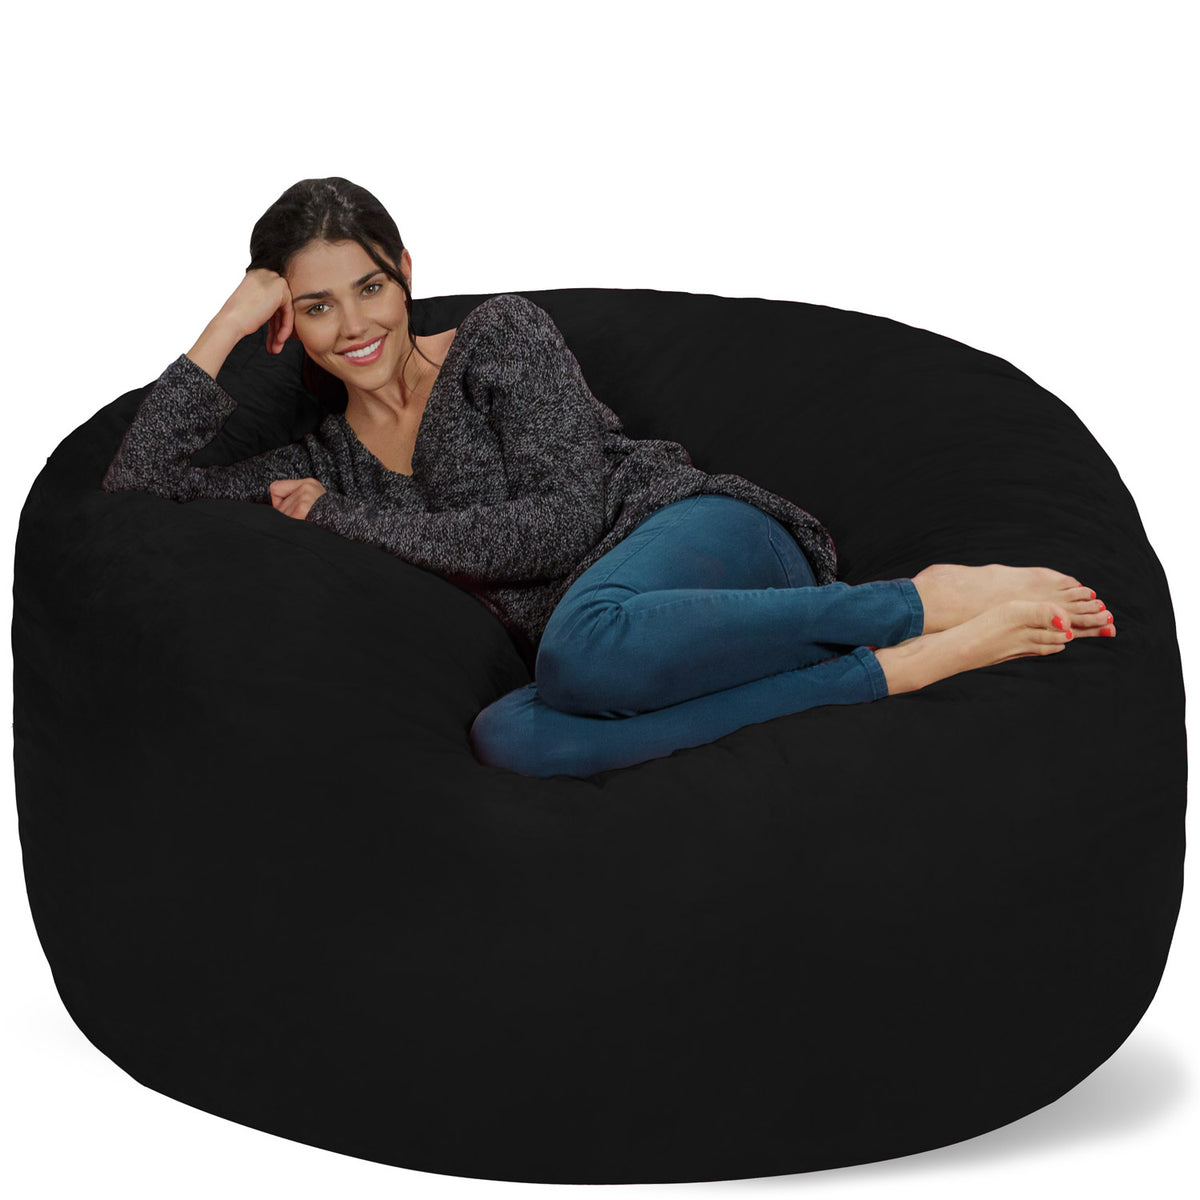 CordaRoy's Bean Bag Bed Review - The Sleep Judge